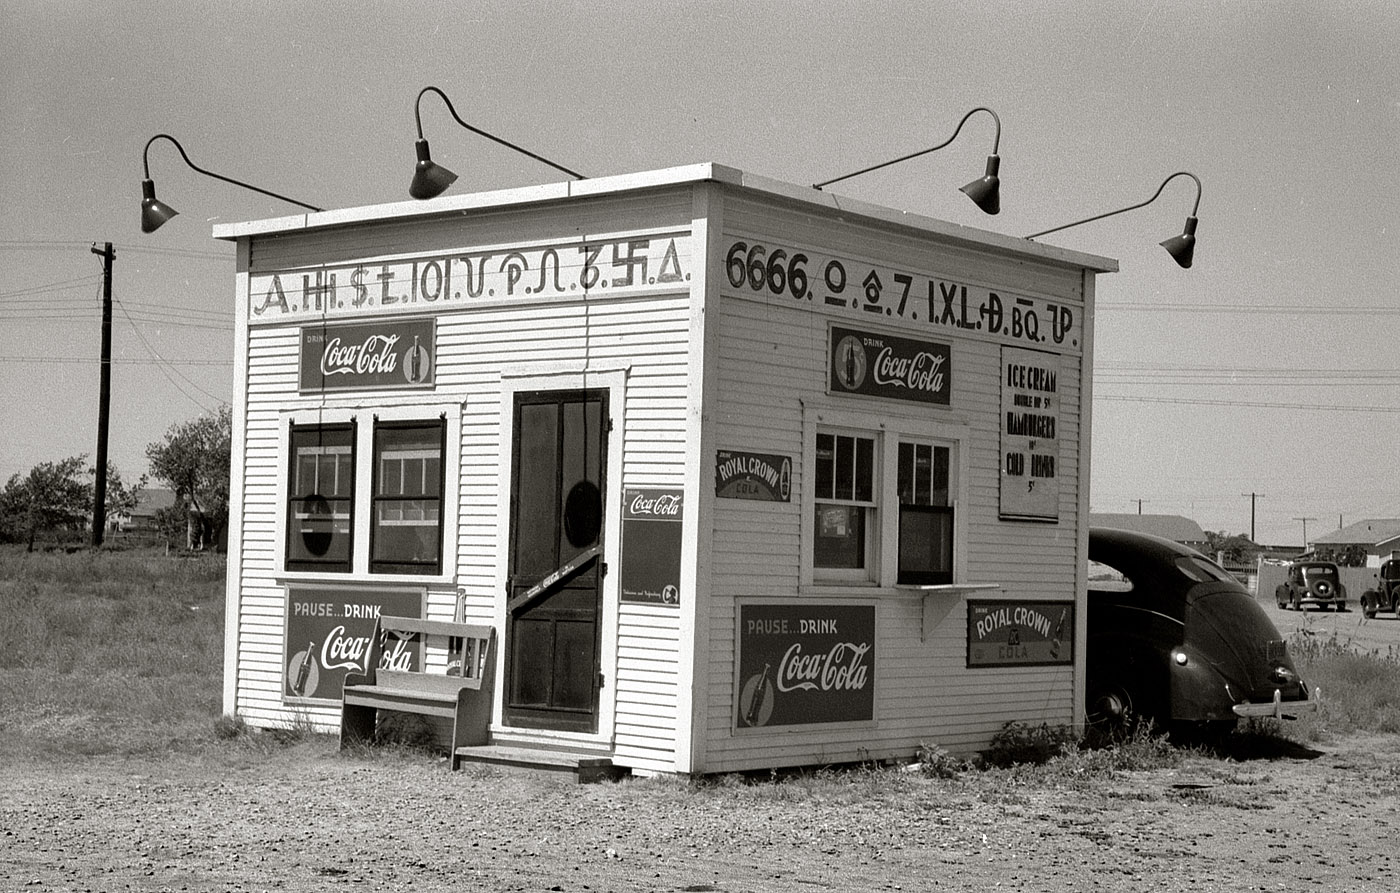 September 1939. "Hamburger stand with old cattle brands. Dumas, Texas." 35mm negative by Russell Lee for the Farm Security Administration. View full size.